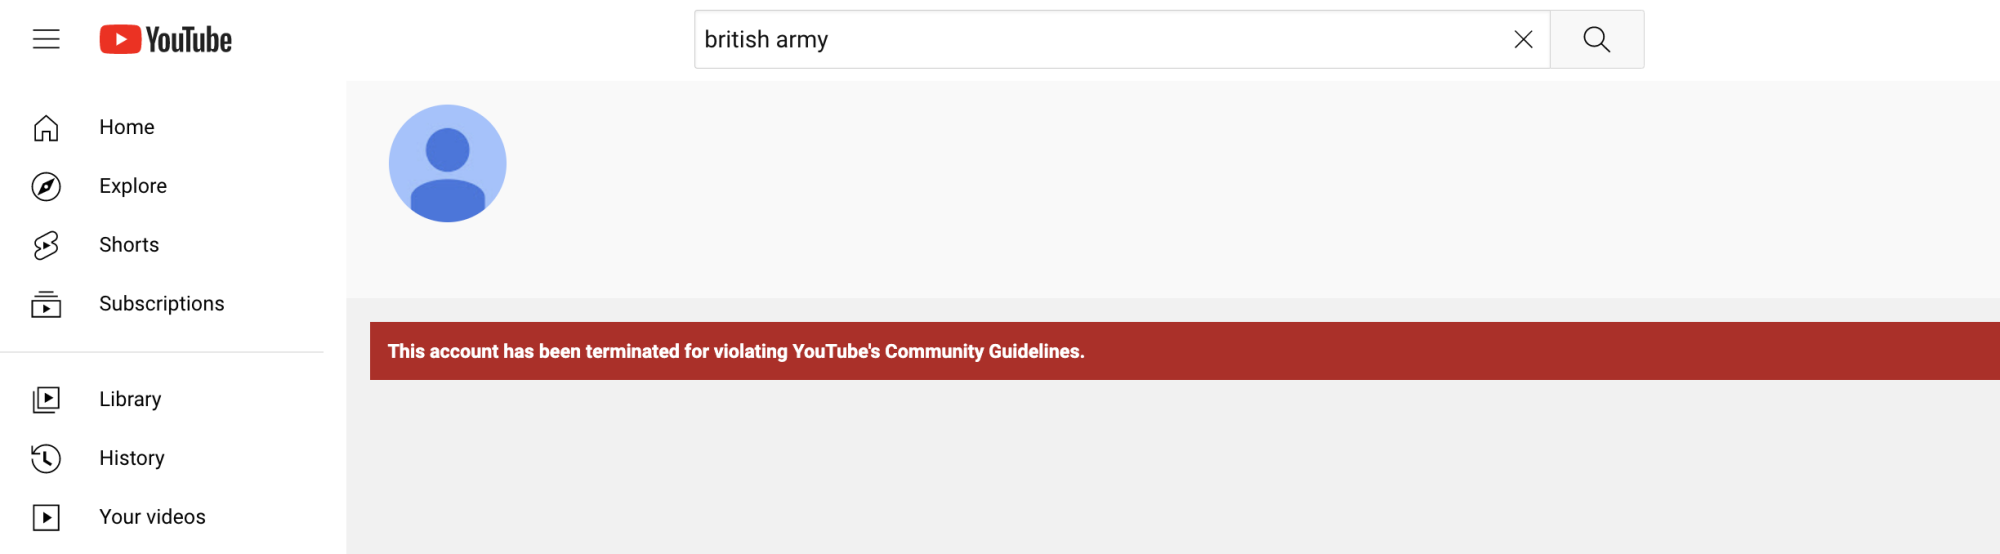 A screenshot of YouTube showing the words "british army" in the search bar and the message "This account has been terminated for violating YouTube's Community Guidelines."